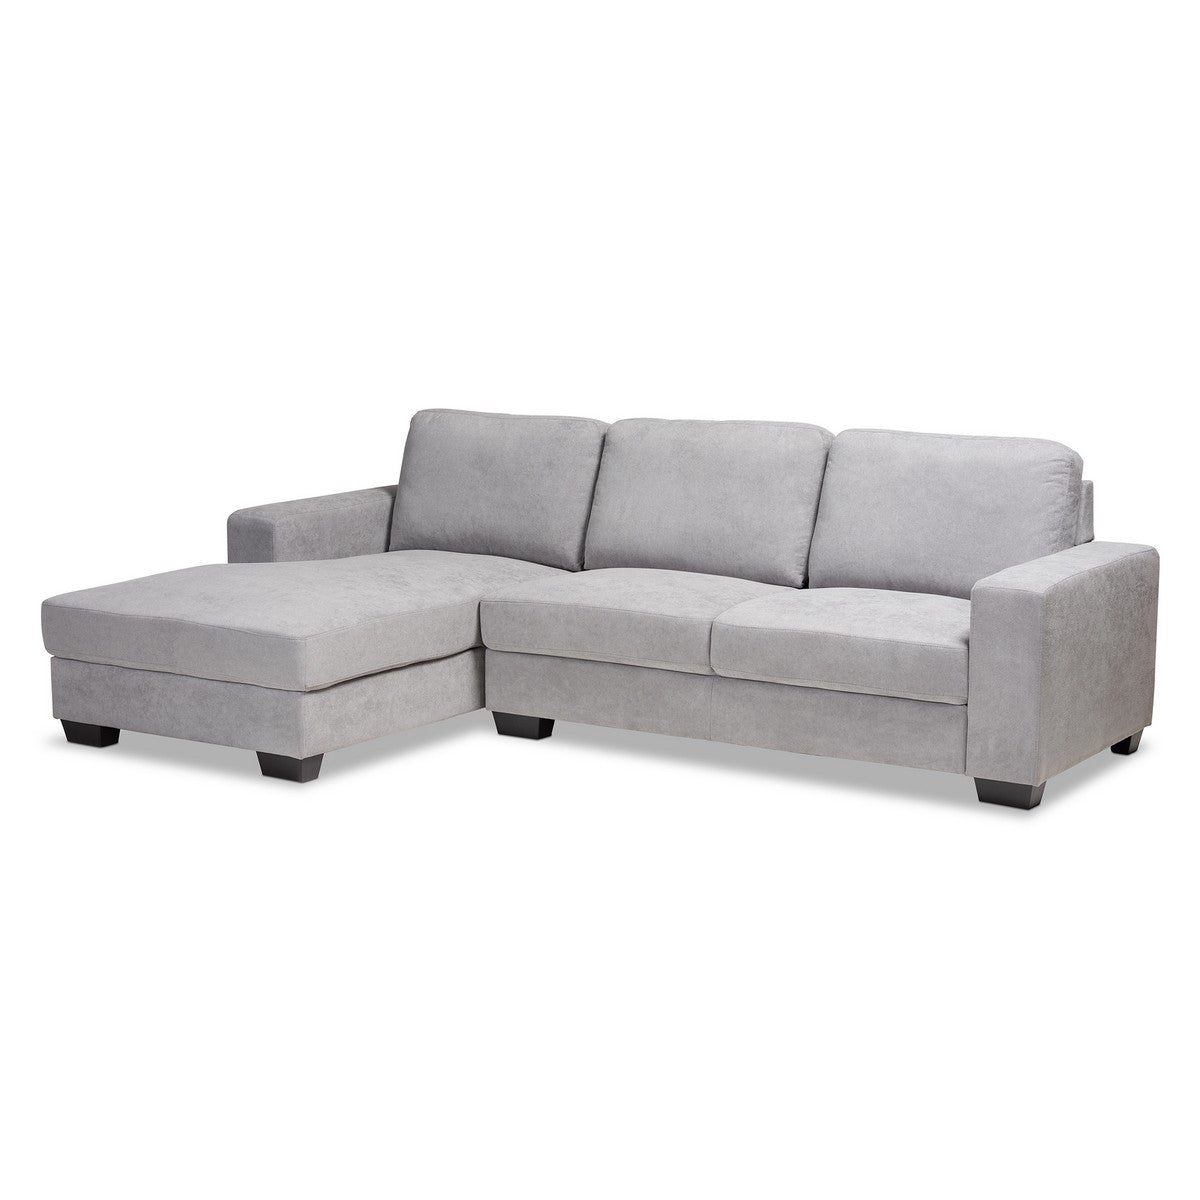 Baxton Studio Nevin Modern and Contemporary Light Grey Fabric Upholstered Sectional Sofa with Left Facing Chaise Baxton Studio-sectionals-Minimal And Modern - 1